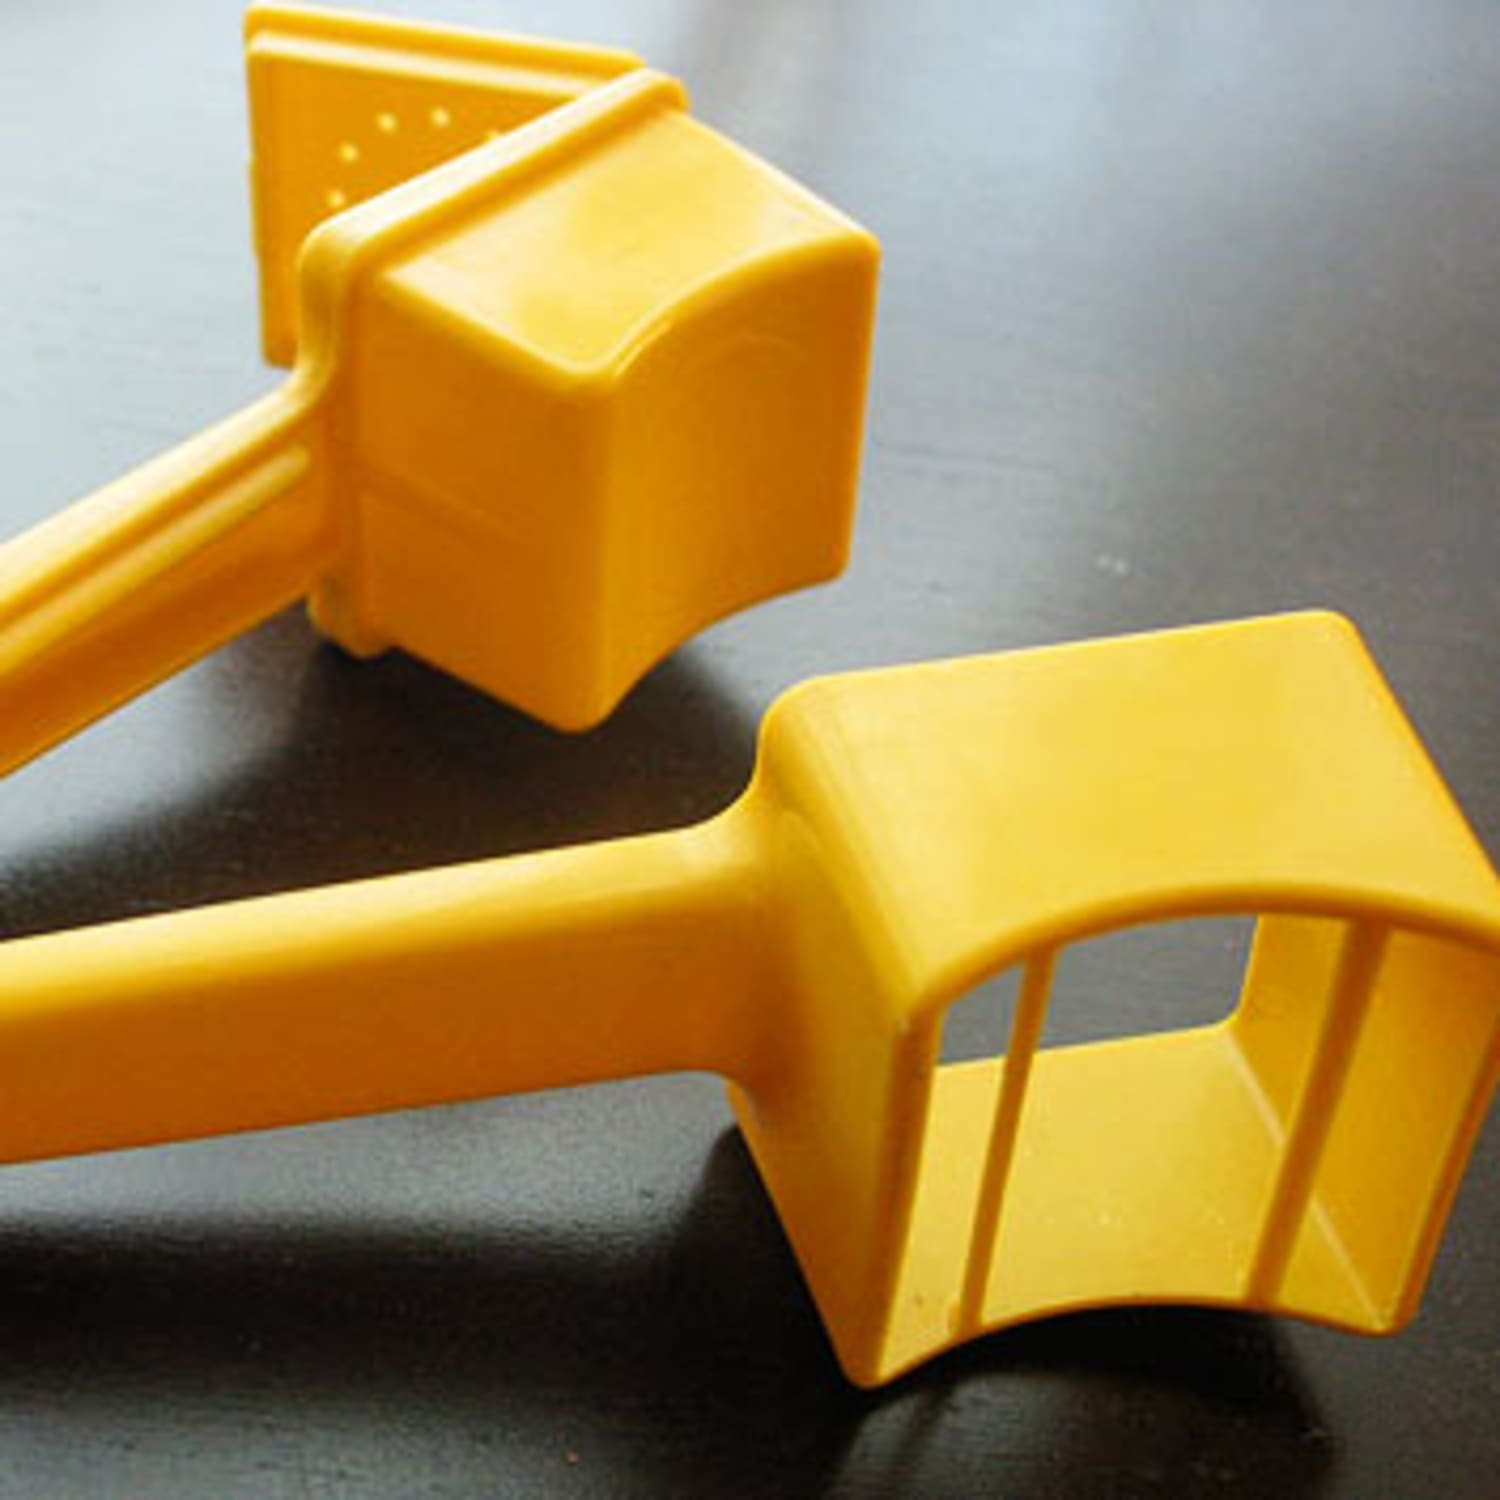 Mystery Gadget: What's This Yellow Plastic Squeezer-Thing?